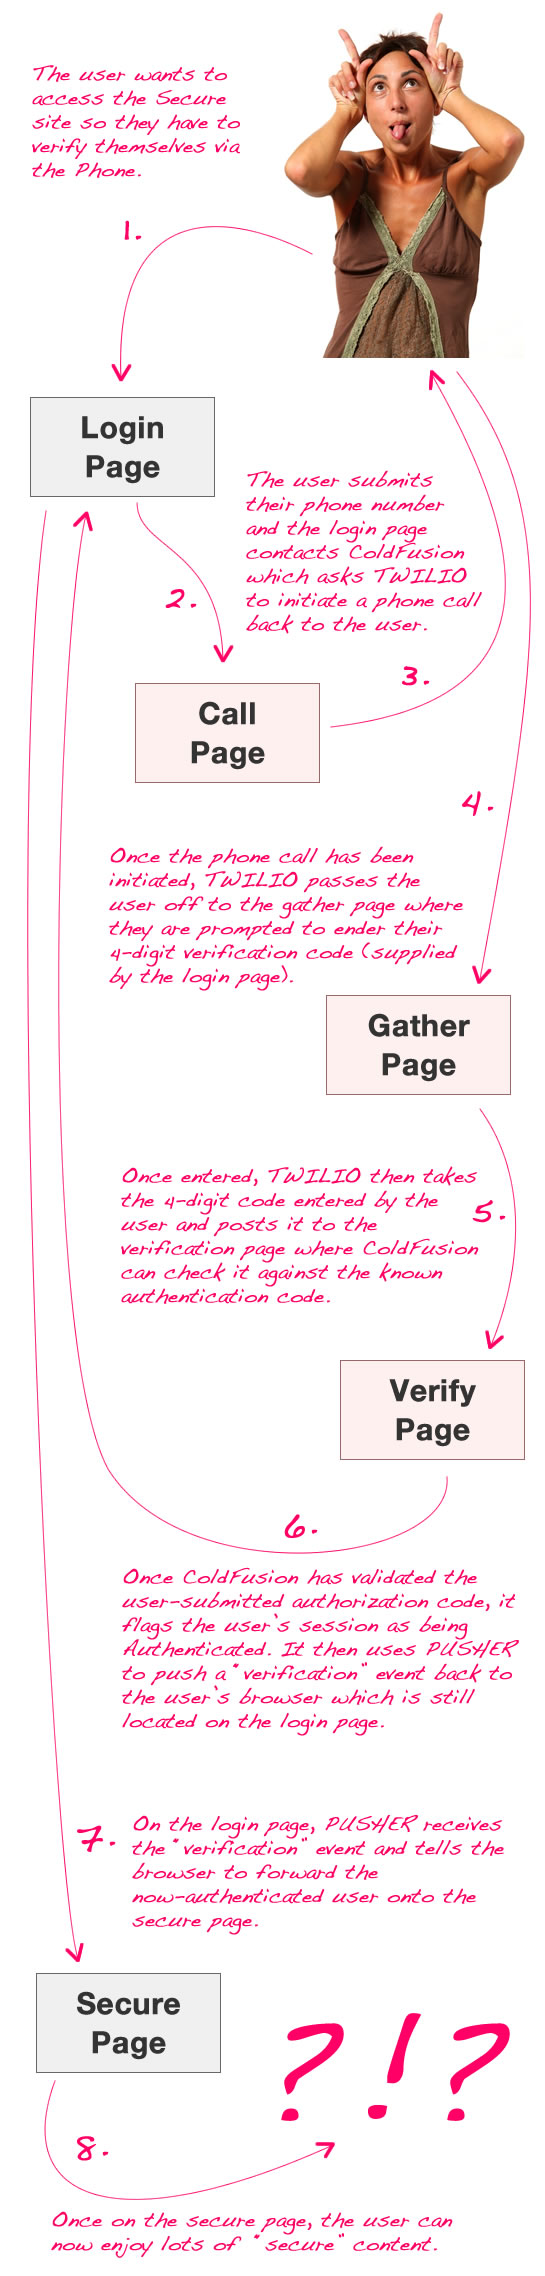 The phone verification workflow using ColdFusion, Twiio, and Pusher to allow for realtime verification between the phone and the web.